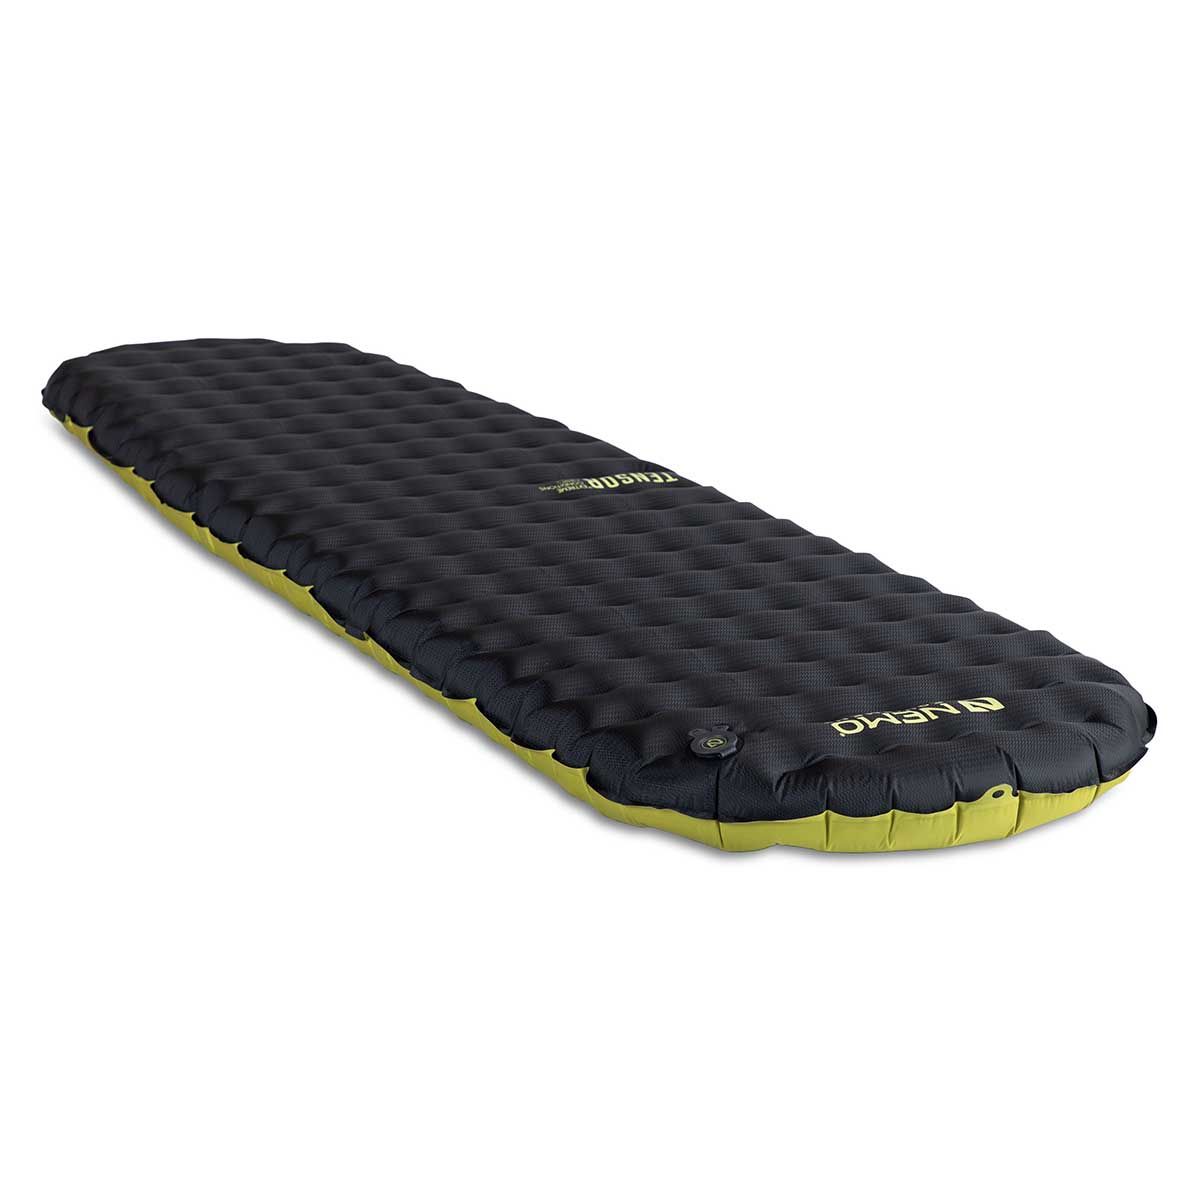 Matelas gonflable Nemo Tensor Extreme Conditions - Regular Mummy